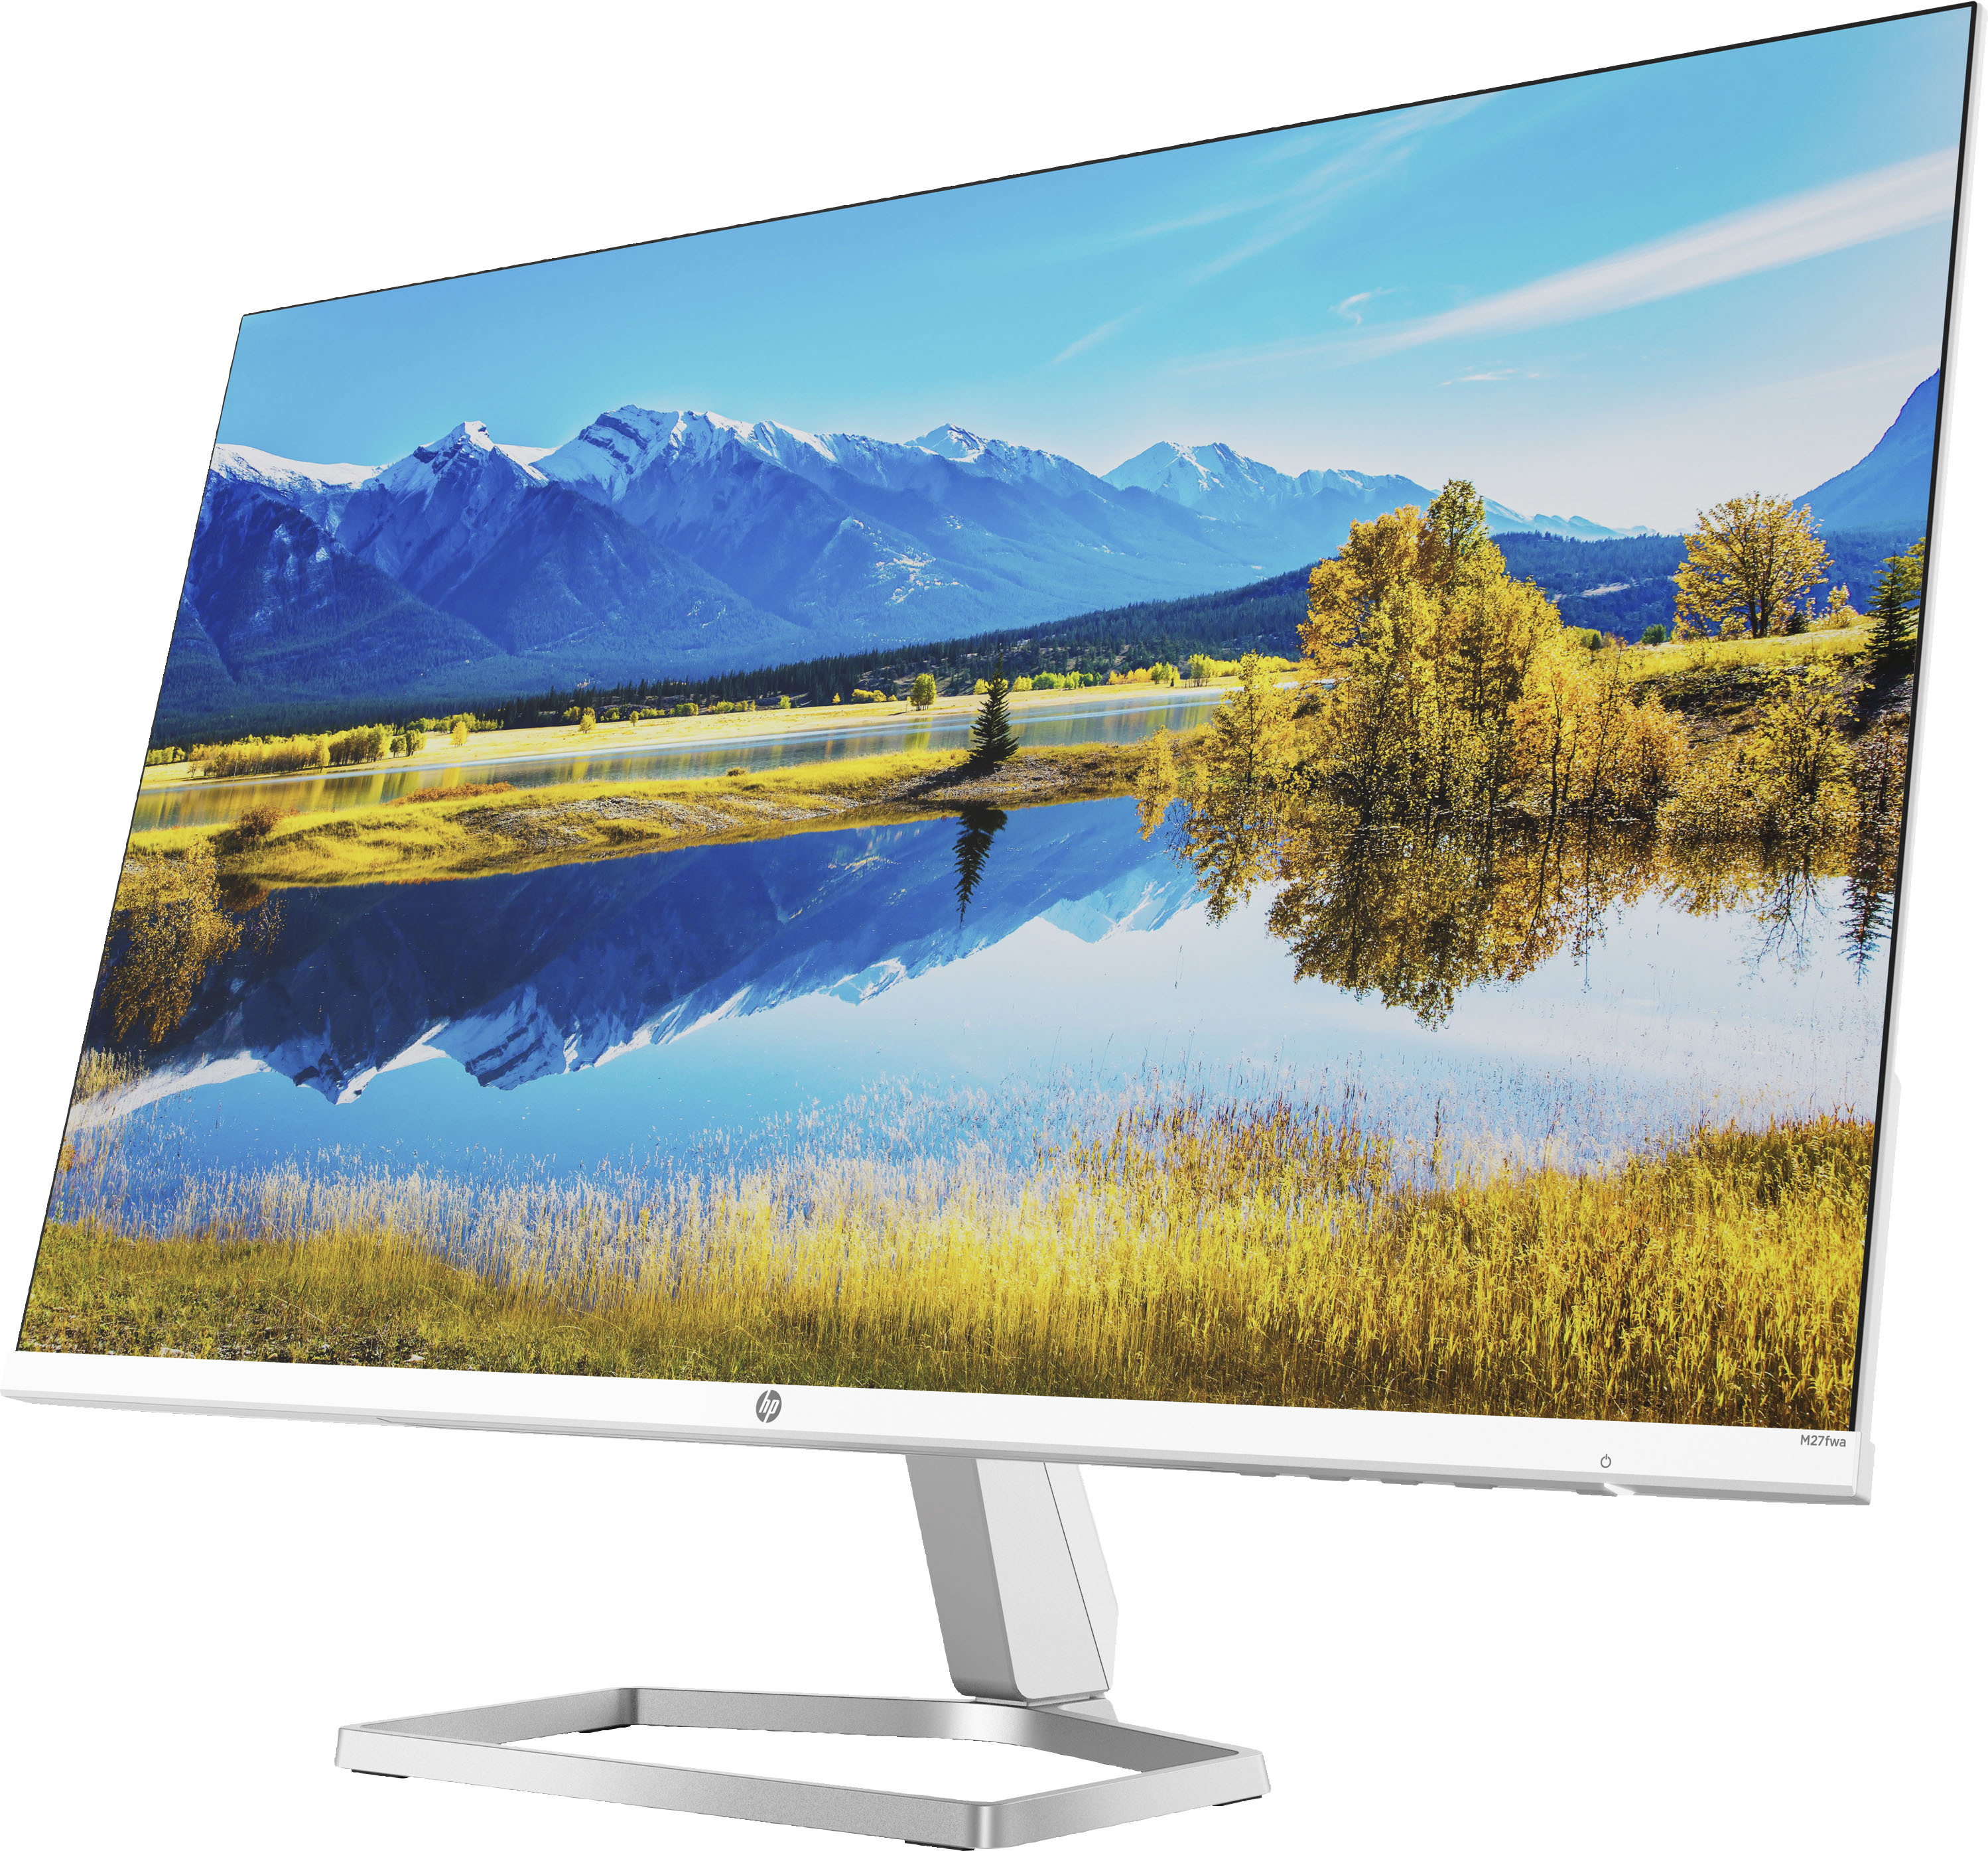 zien probleem Tochi boom HP 27" IPS LED FHD FreeSync Monitor (HDMI x2, VGA) with Integrated Speakers  Ceramic White M27fwa - Best Buy